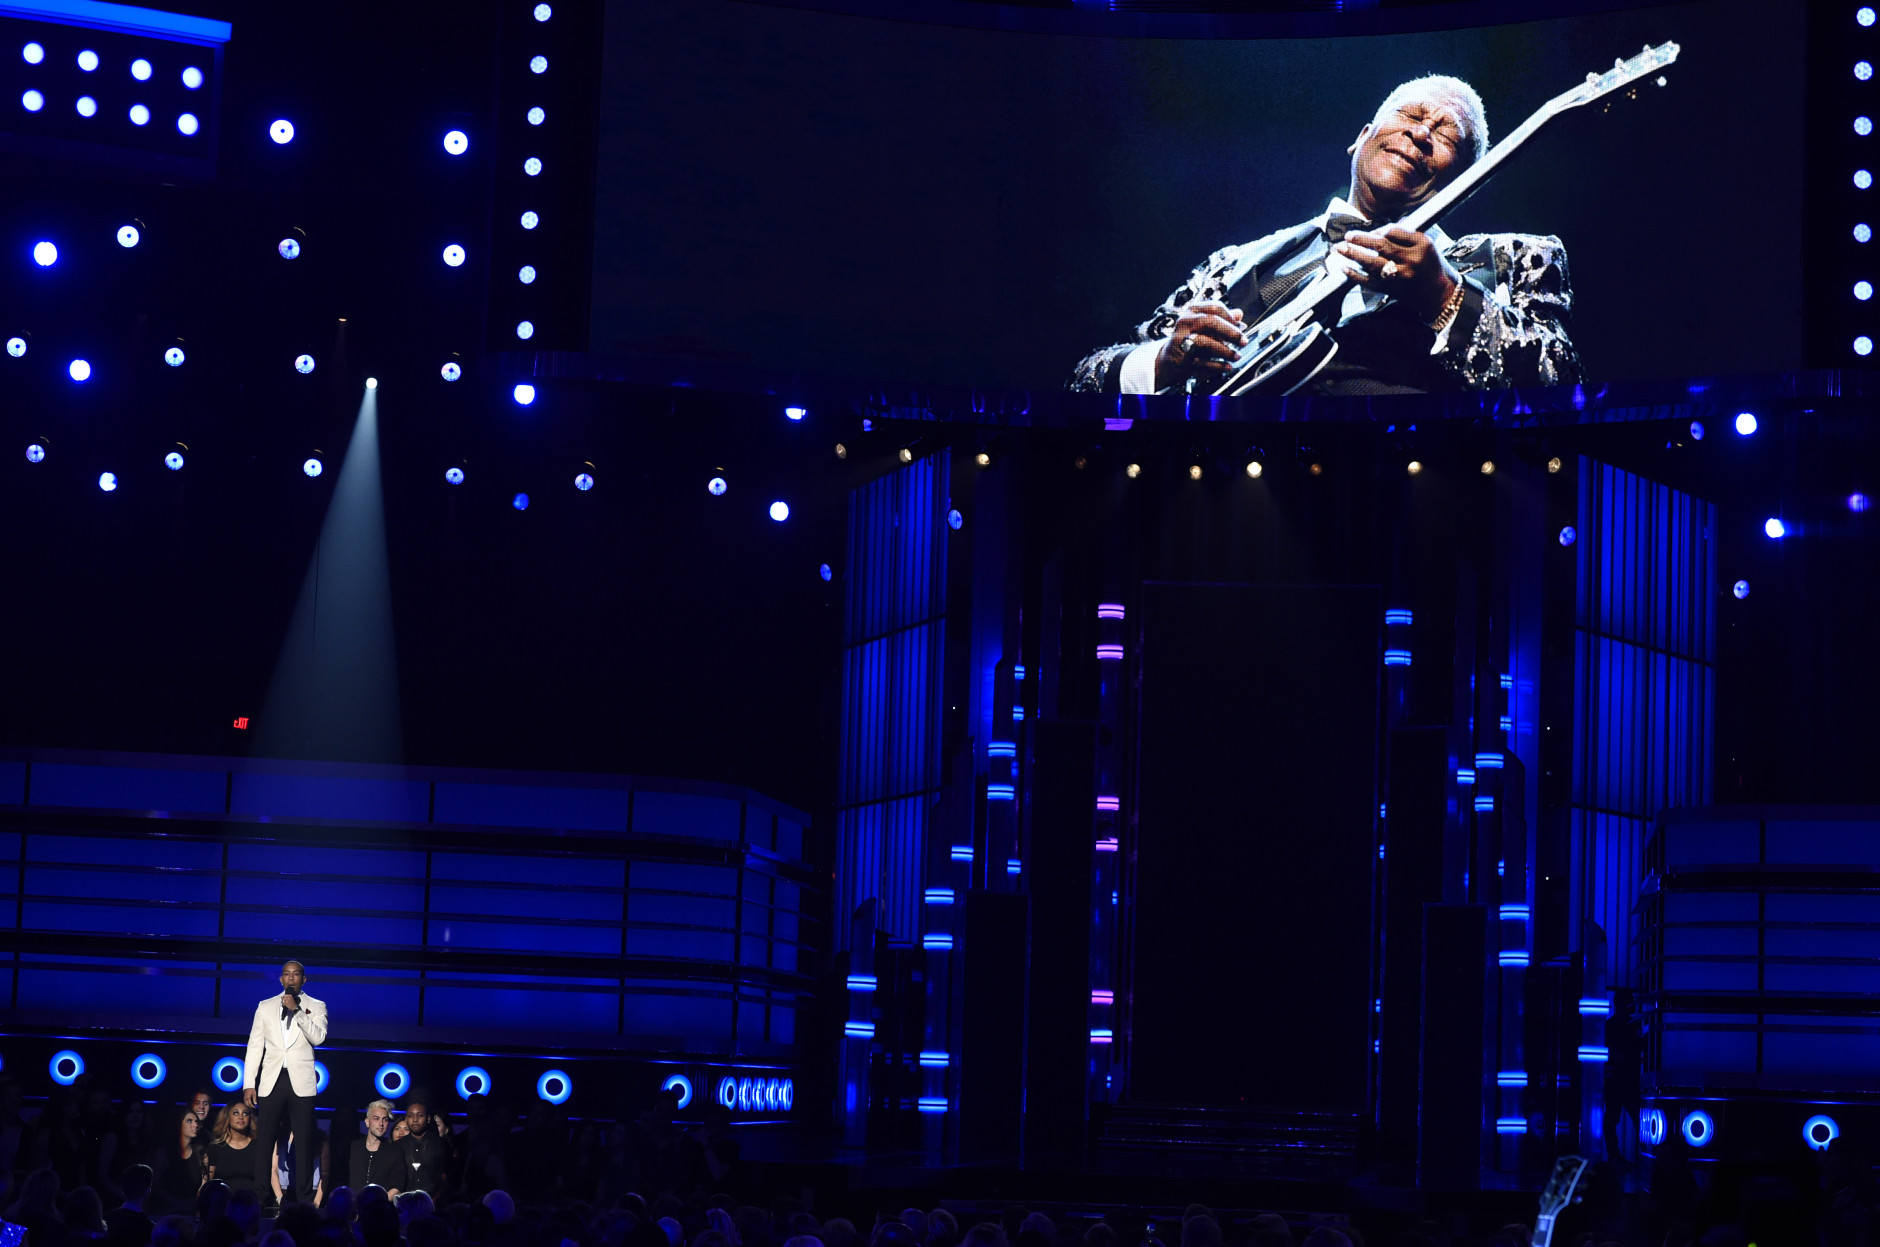 Ludacris presents a tribute to B.B. King at the Billboard Music Awards at the MGM Grand Garden Arena on Sunday, May 17, 2015, in Las Vegas. (Photo by Chris Pizzello/Invision/AP)